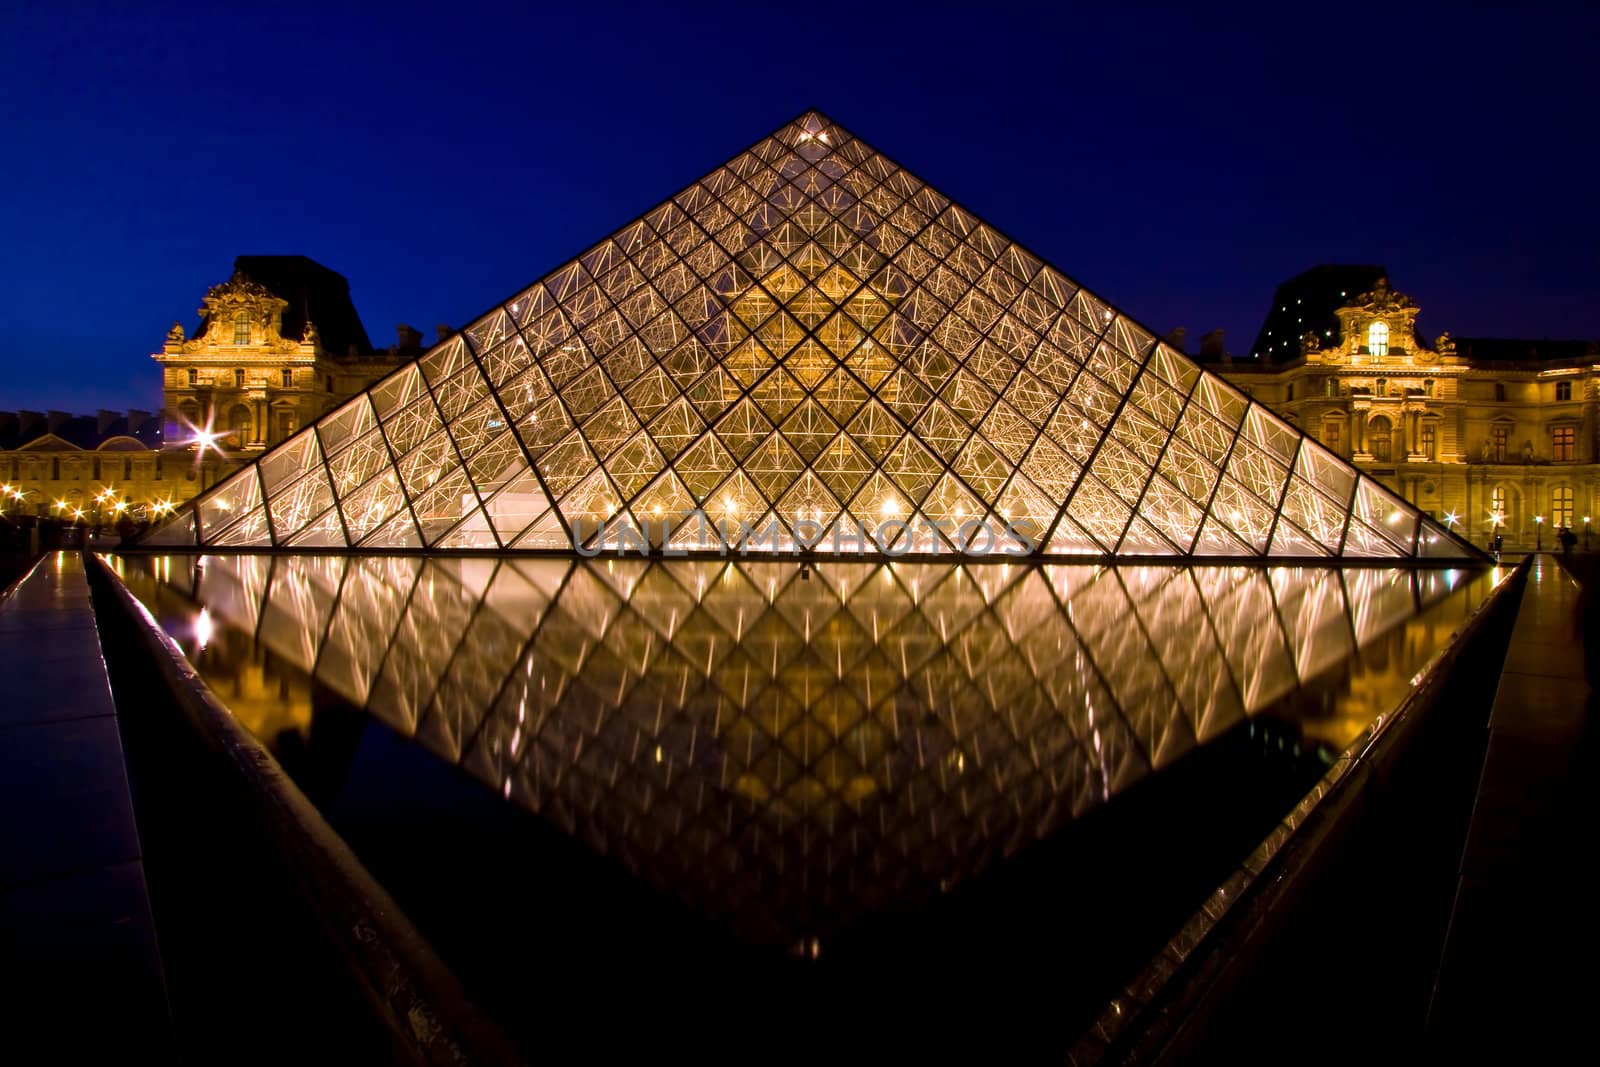 PARIS - APRIL 16: Reflection of Louvre pyramid shines at dusk during the Summer Exhibition April 16, 2010 in Paris. This is one of the most popular tourist destinations in France.